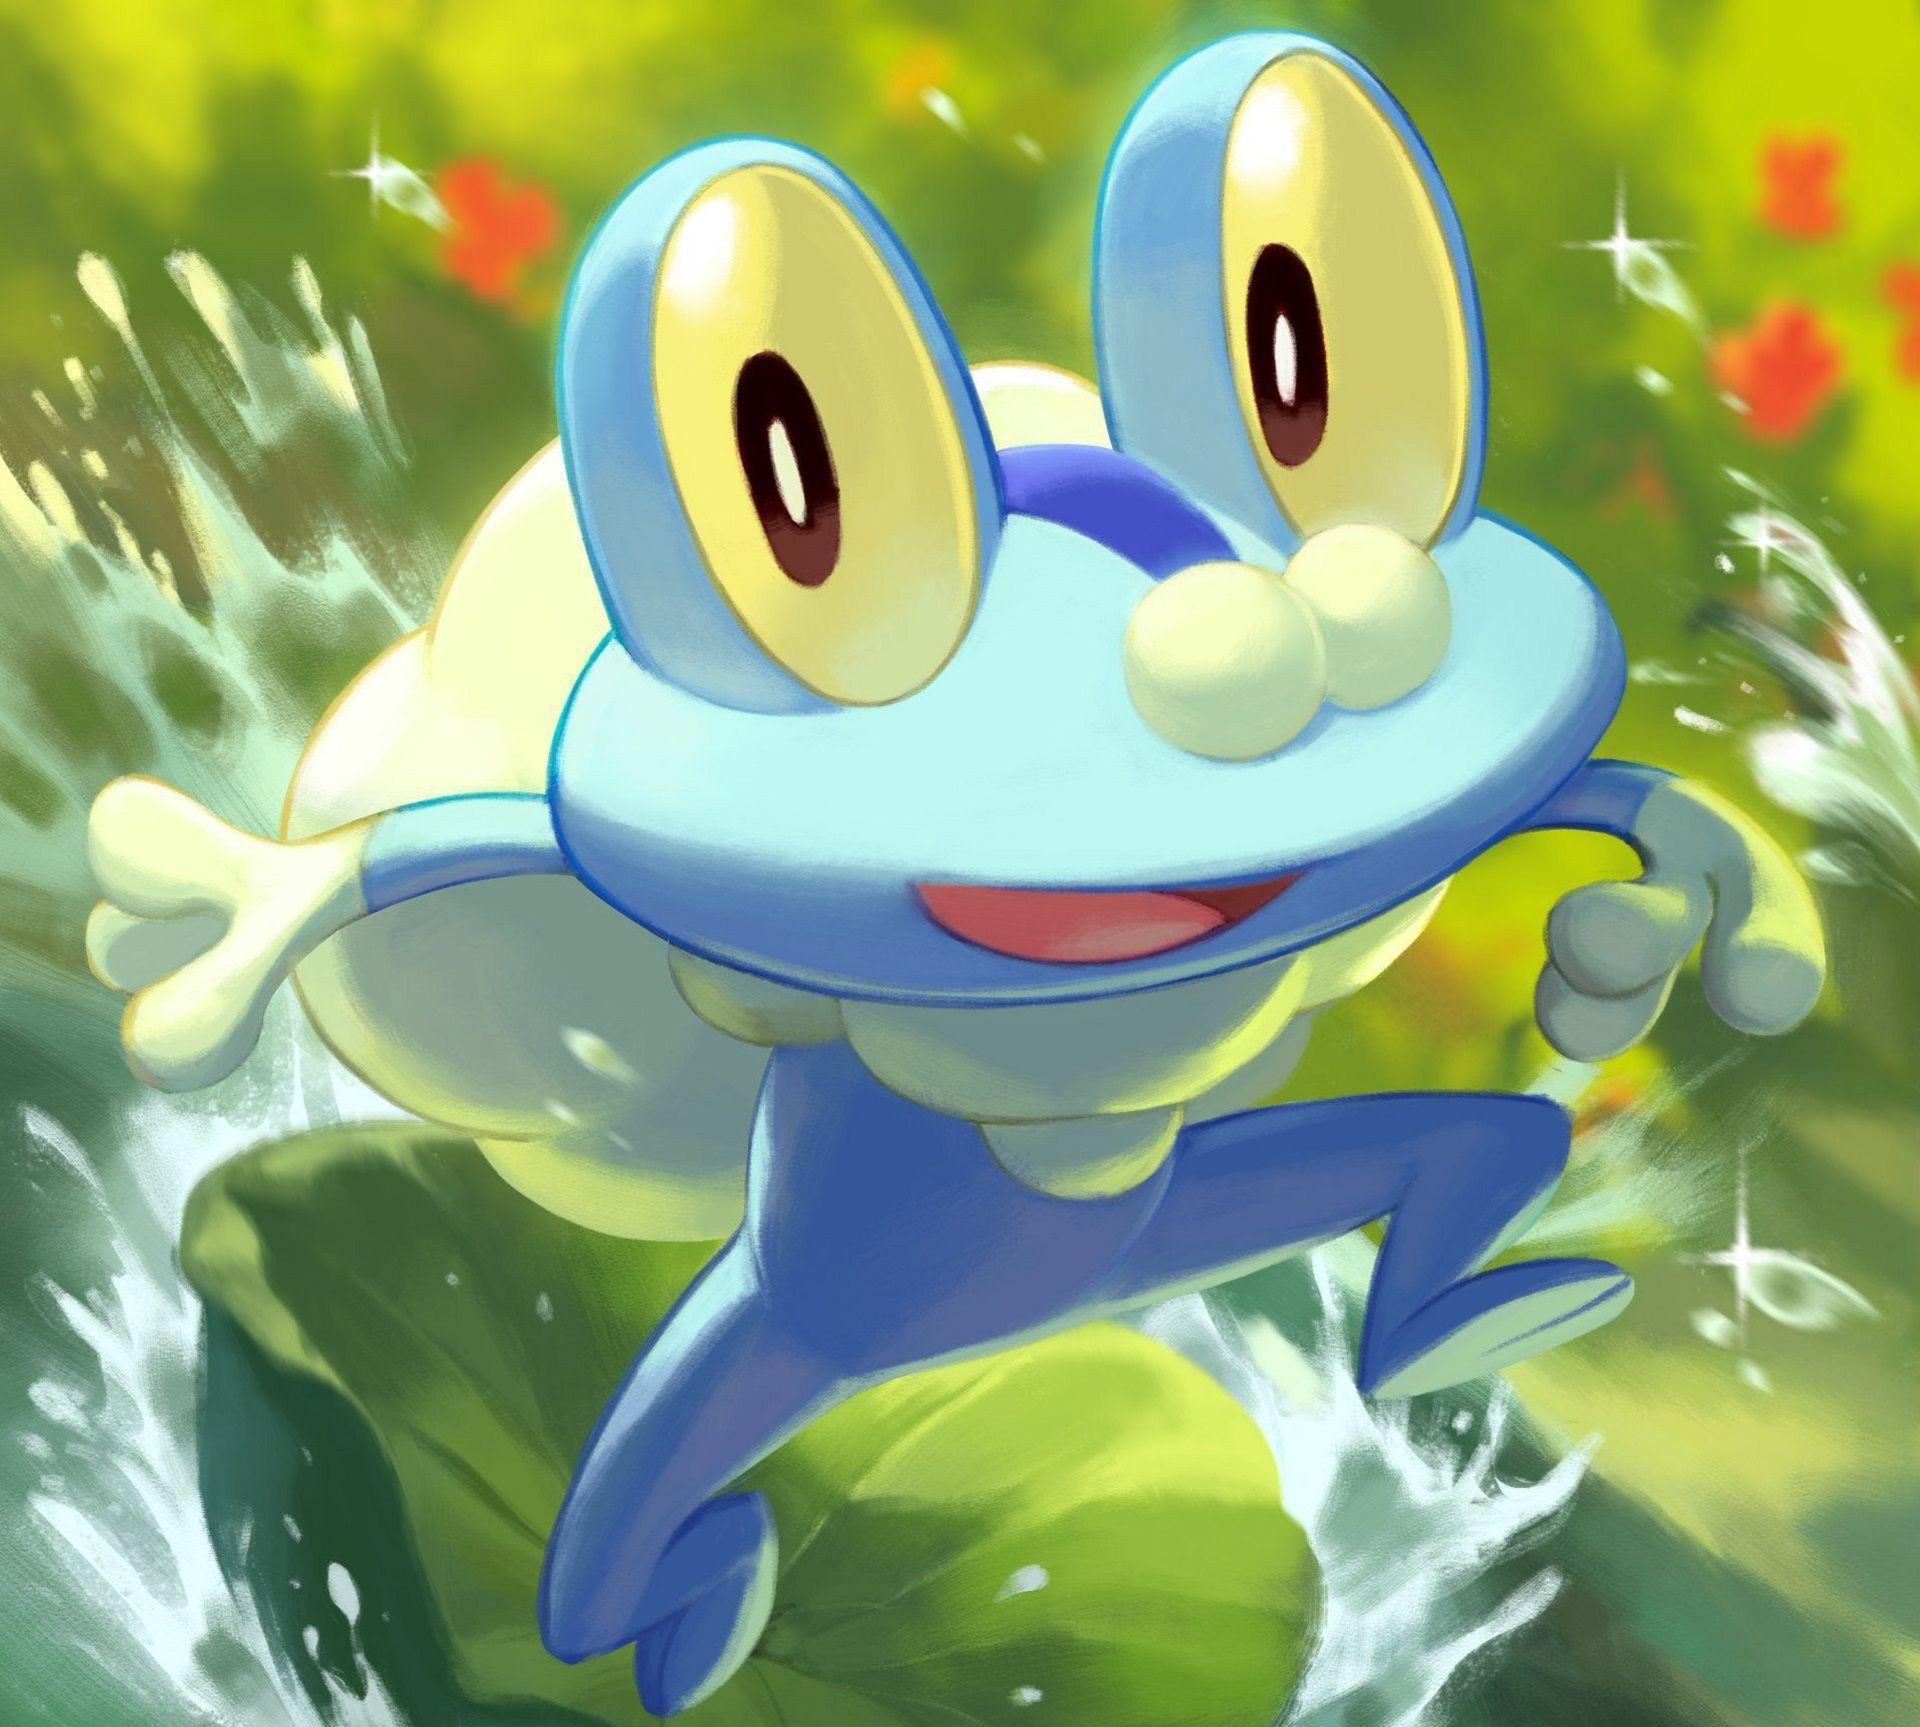 Froakie Wallpaper Image Photo Picture Background